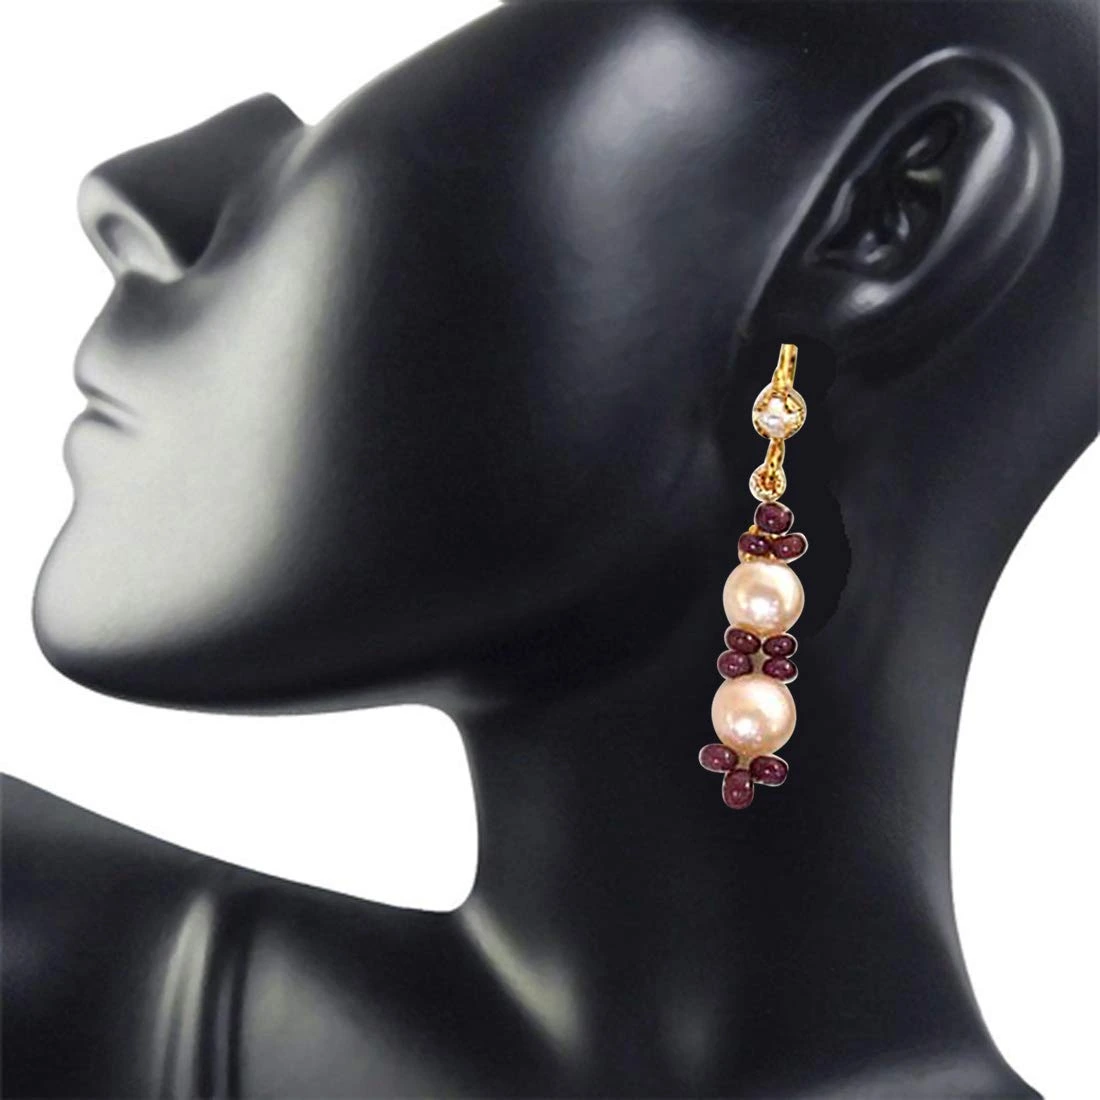 Real Ruby Beads & Peach Button Pearl Hanging Earrings for Women (SE129)